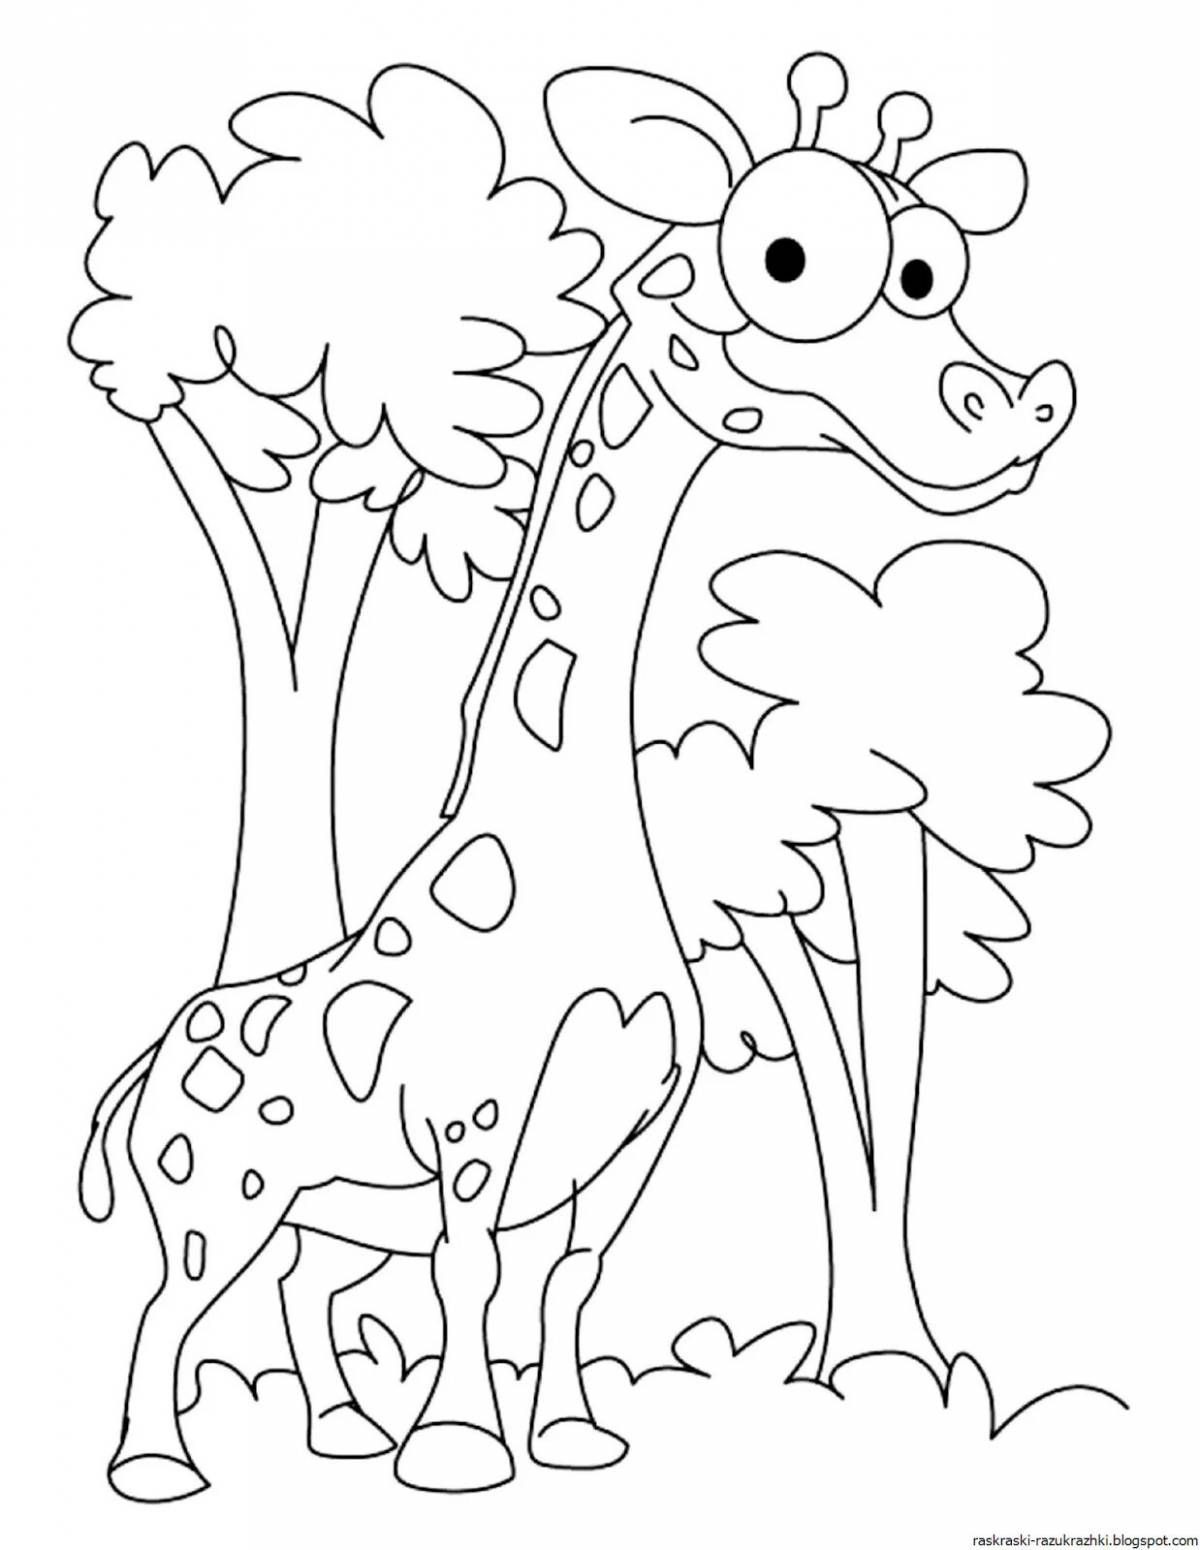 Refreshing giraffe coloring page for kids